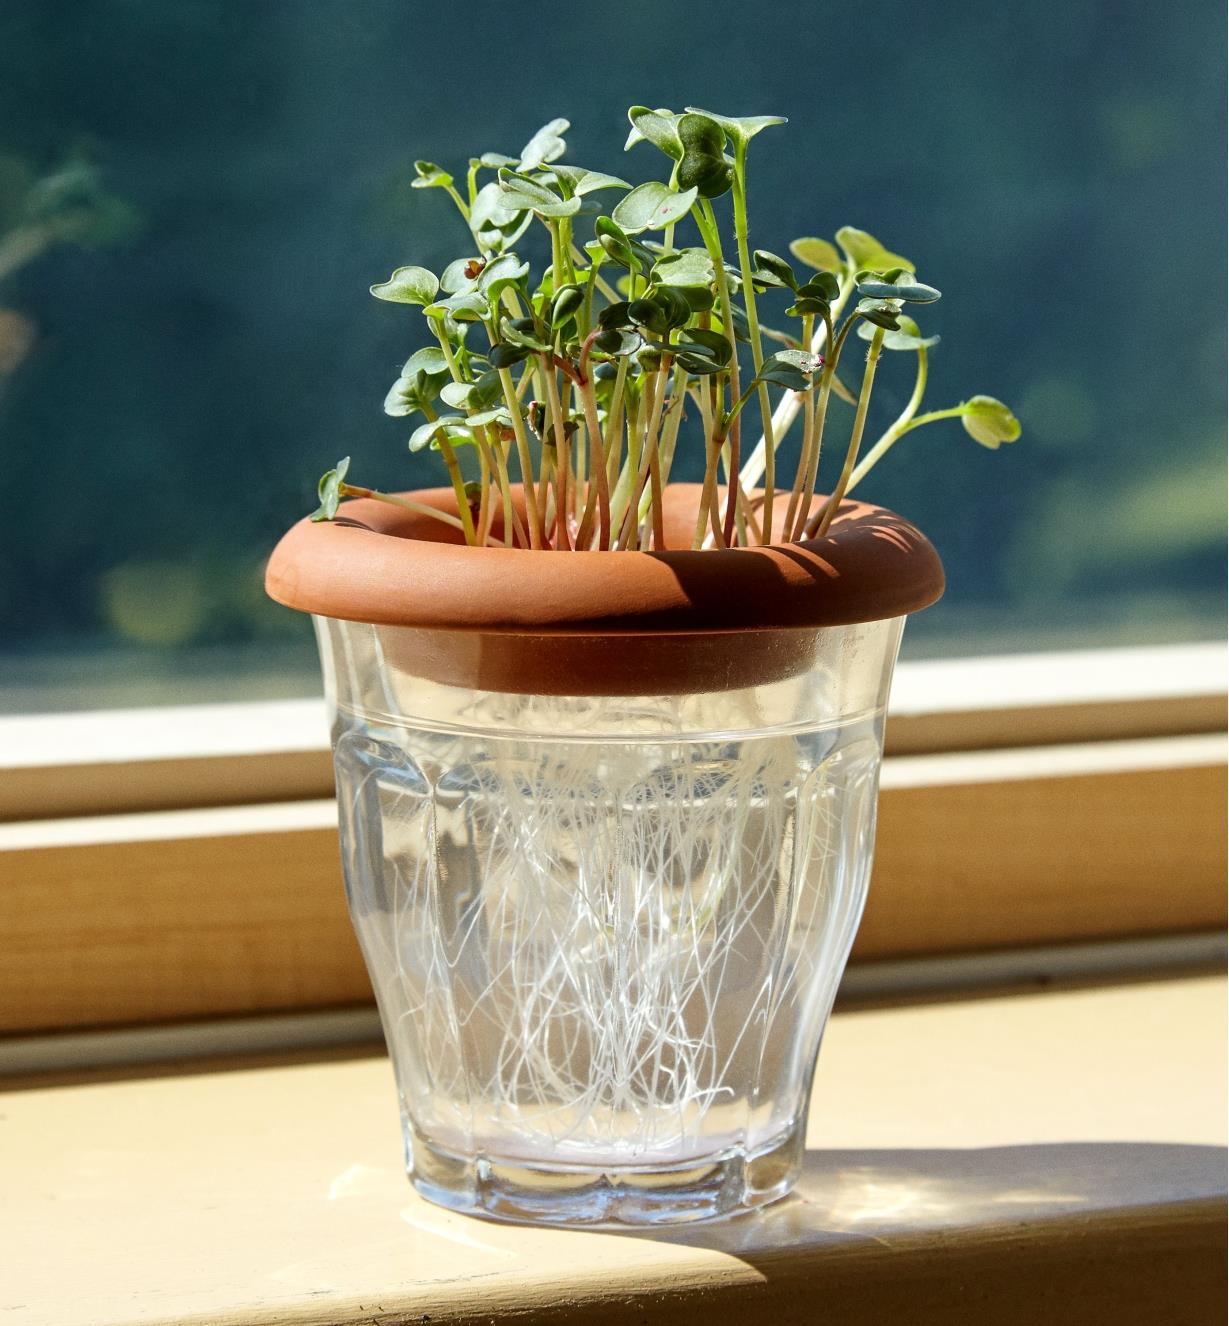 Radish sprouts being grown from seed in a terra cotta sprouter placed on top of a jar of water